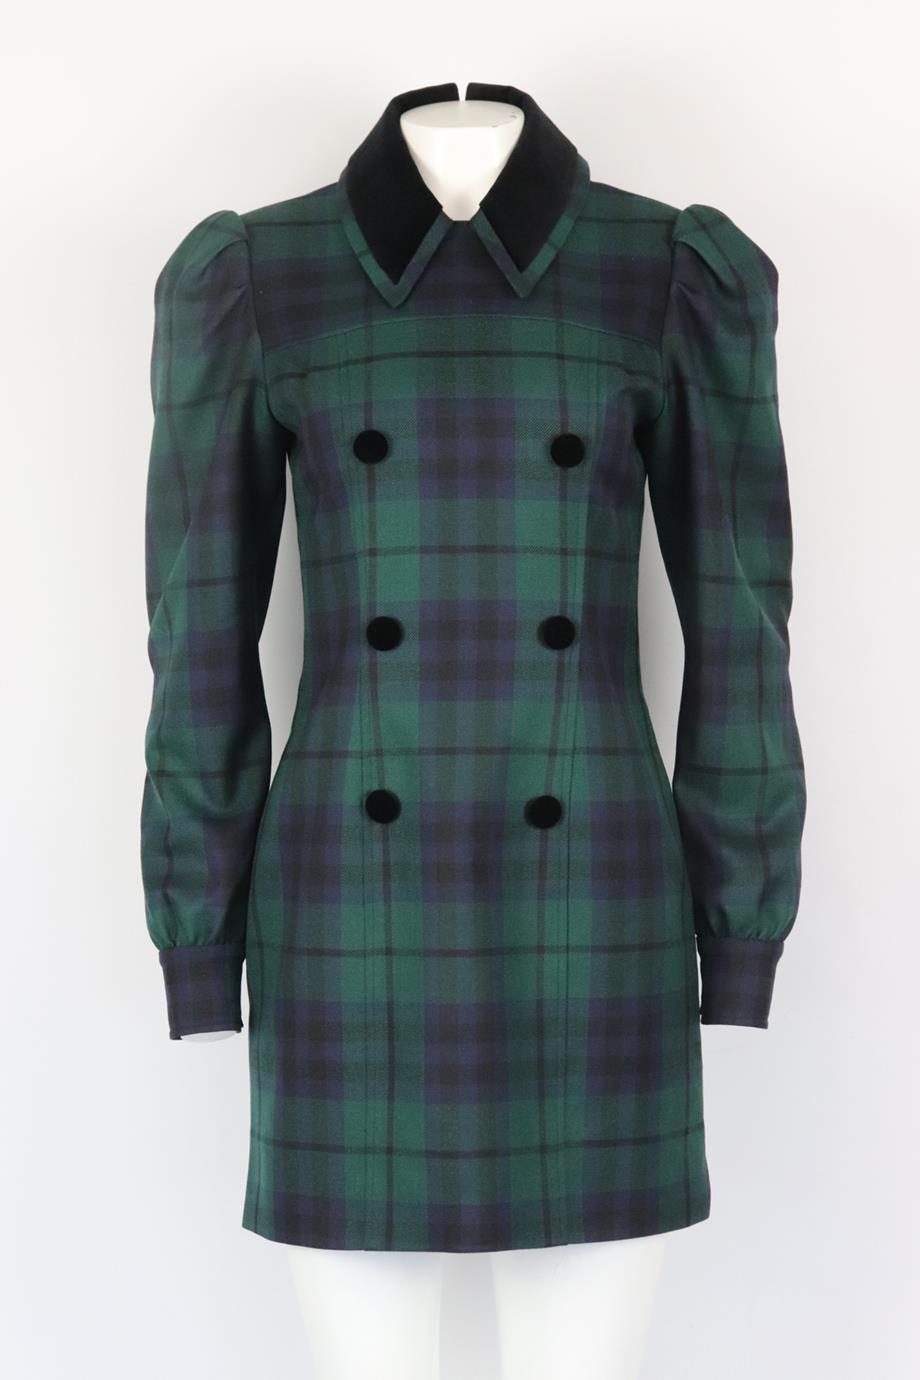 Alessandra Rich velvet trimmed checked wool blend mini dress. Green, navy and black. Long sleeve, crewneck. Zip fastening at front. 100% Wool; fabric2: 99% cotton, 1% elastane; lining: 65% viscose, 35% polyester; lining2: 100% polyamide. Size: IT 42